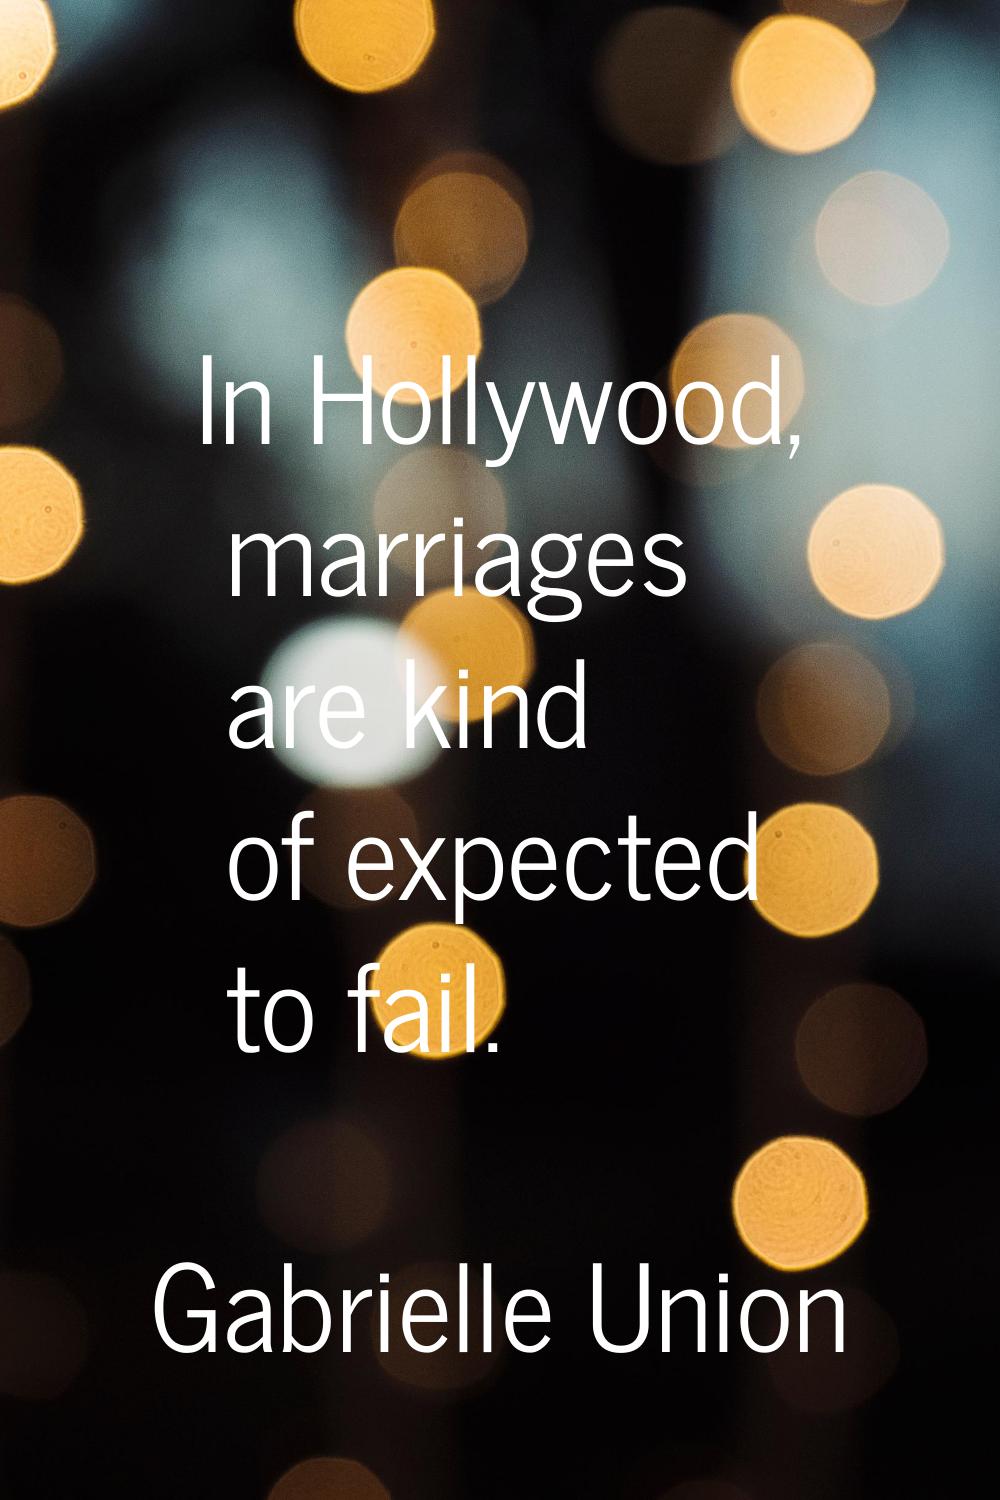 In Hollywood, marriages are kind of expected to fail.